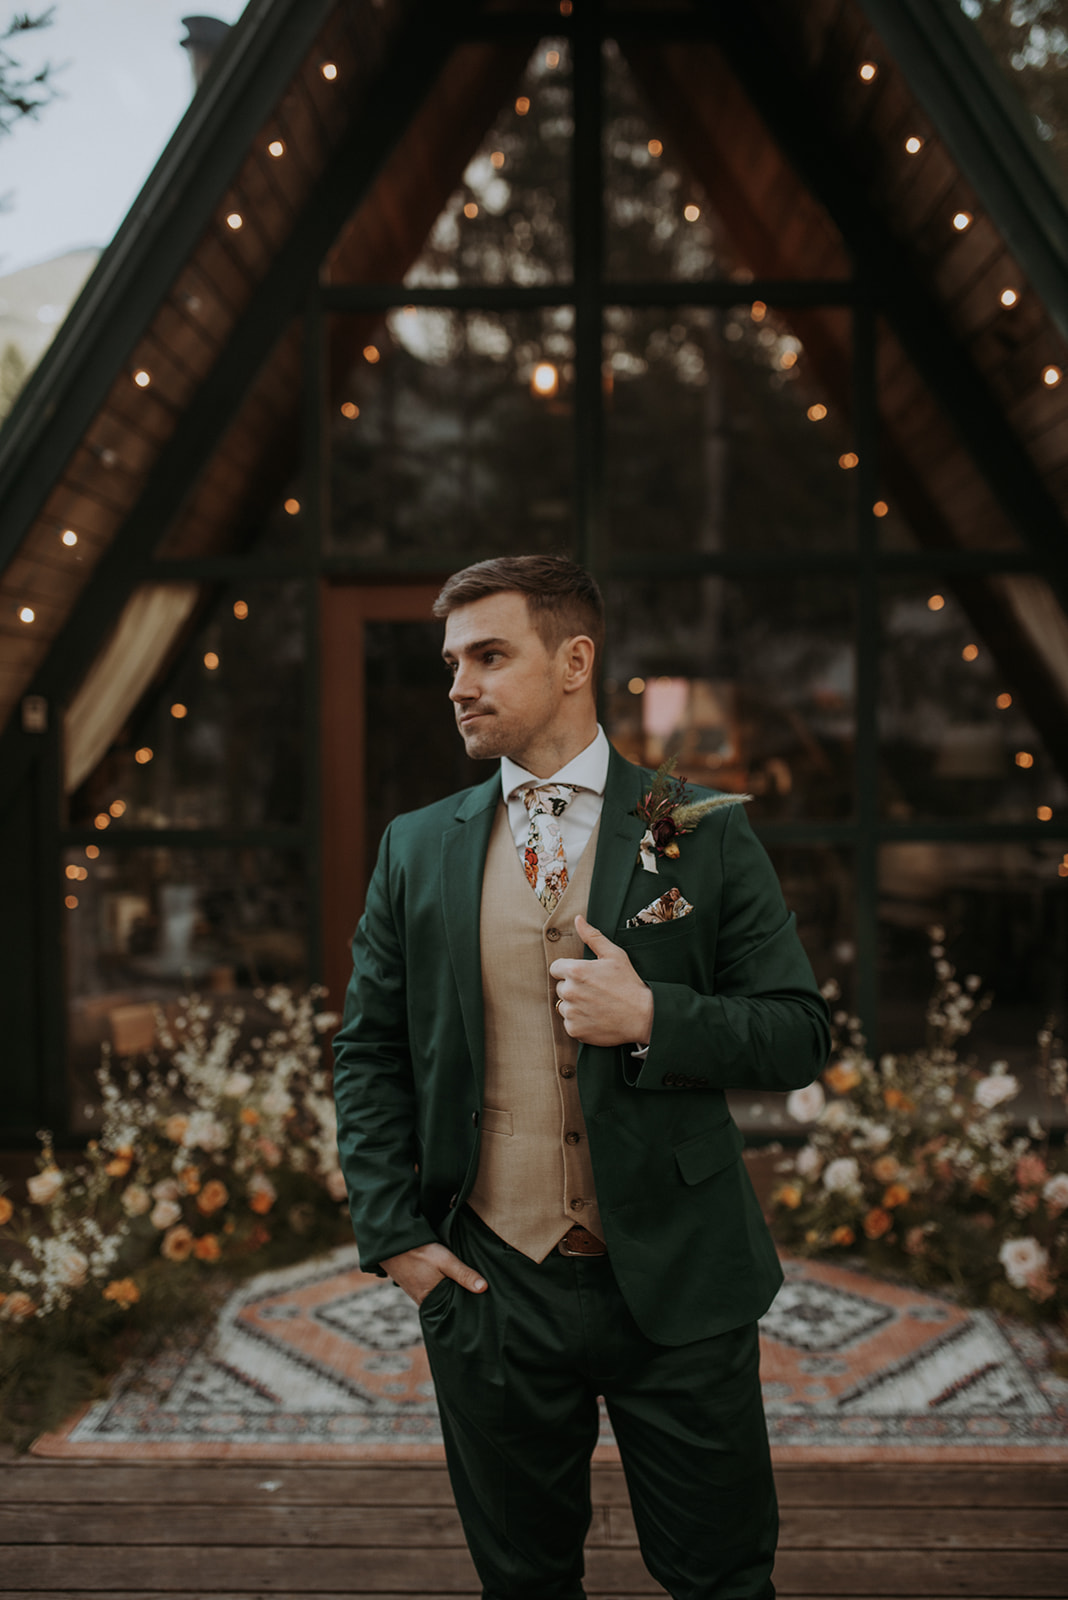 Mount Rainier elopement photographer captures intimate moment at cozy a-frame cabin, Woodsy wedding details, charcuterie